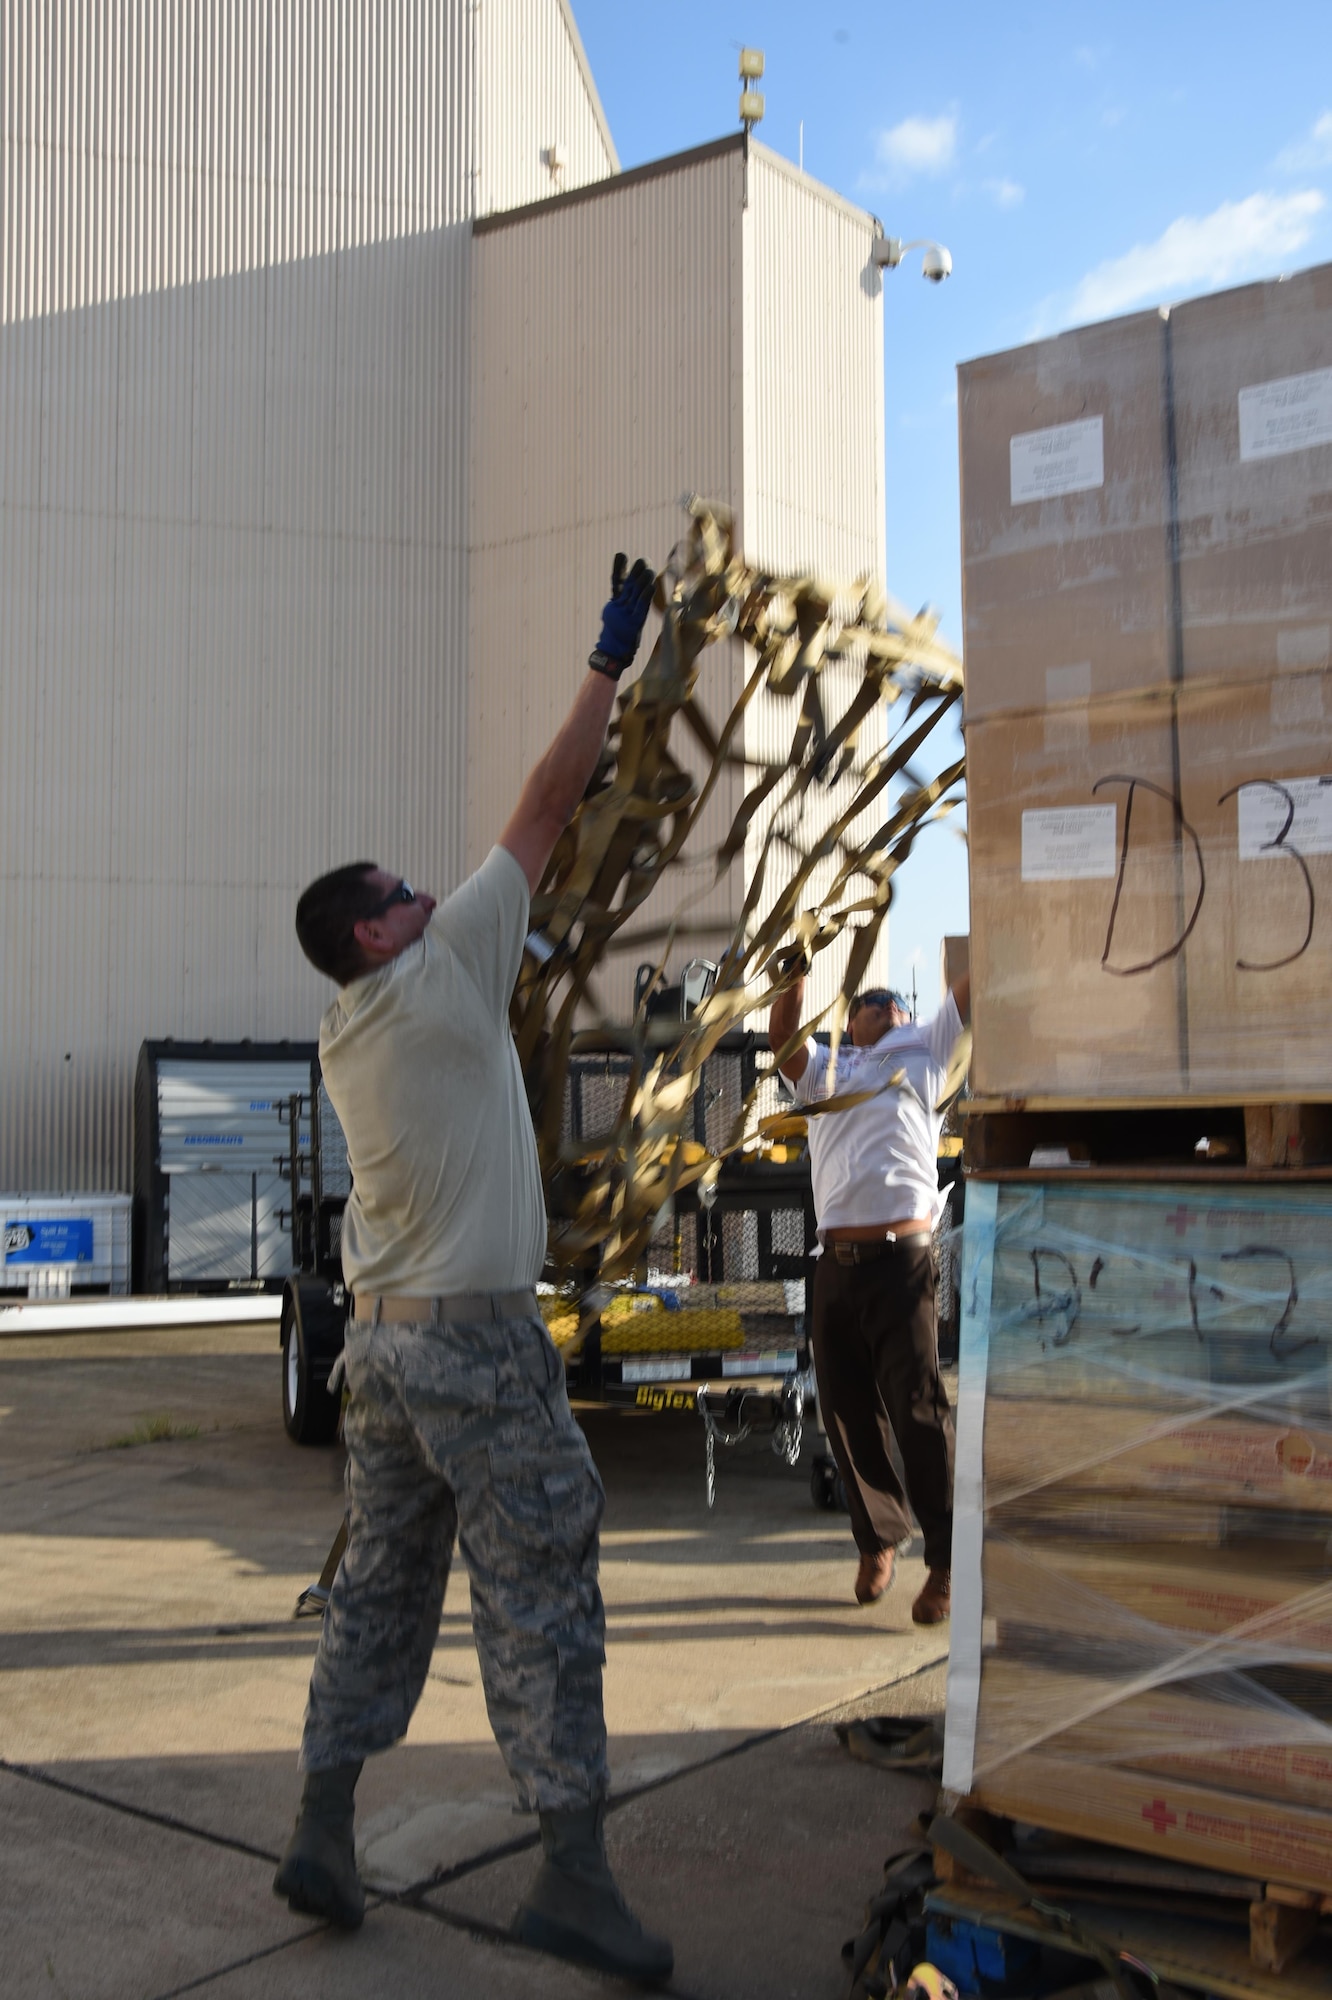 Air Force Tech. Sgt. Lucas Ortega, 73rd Aerial Port Squadron cargo supervisor, and Mr. Jose Guajardo, 301st Mission Support Group emergency management, toss webbing on a pallet to secure American Red Cross supplies before their transport August 29, 2017, at Naval Air Station Fort Worth Joint Reserve Base, Texas, in support of Hurricane Harvey relief efforts. There were 90,000 lbs. of supplies, included blankets and cots, sent as part of the Defense Support of Civil Authority. Department of Defense provides medium and heavy lift rotary wing assets, along with ground transportation, to move personnel, commodities and equipment within Texas. (U.S. Air Force photo by Ms. Julie Briden-Garcia)